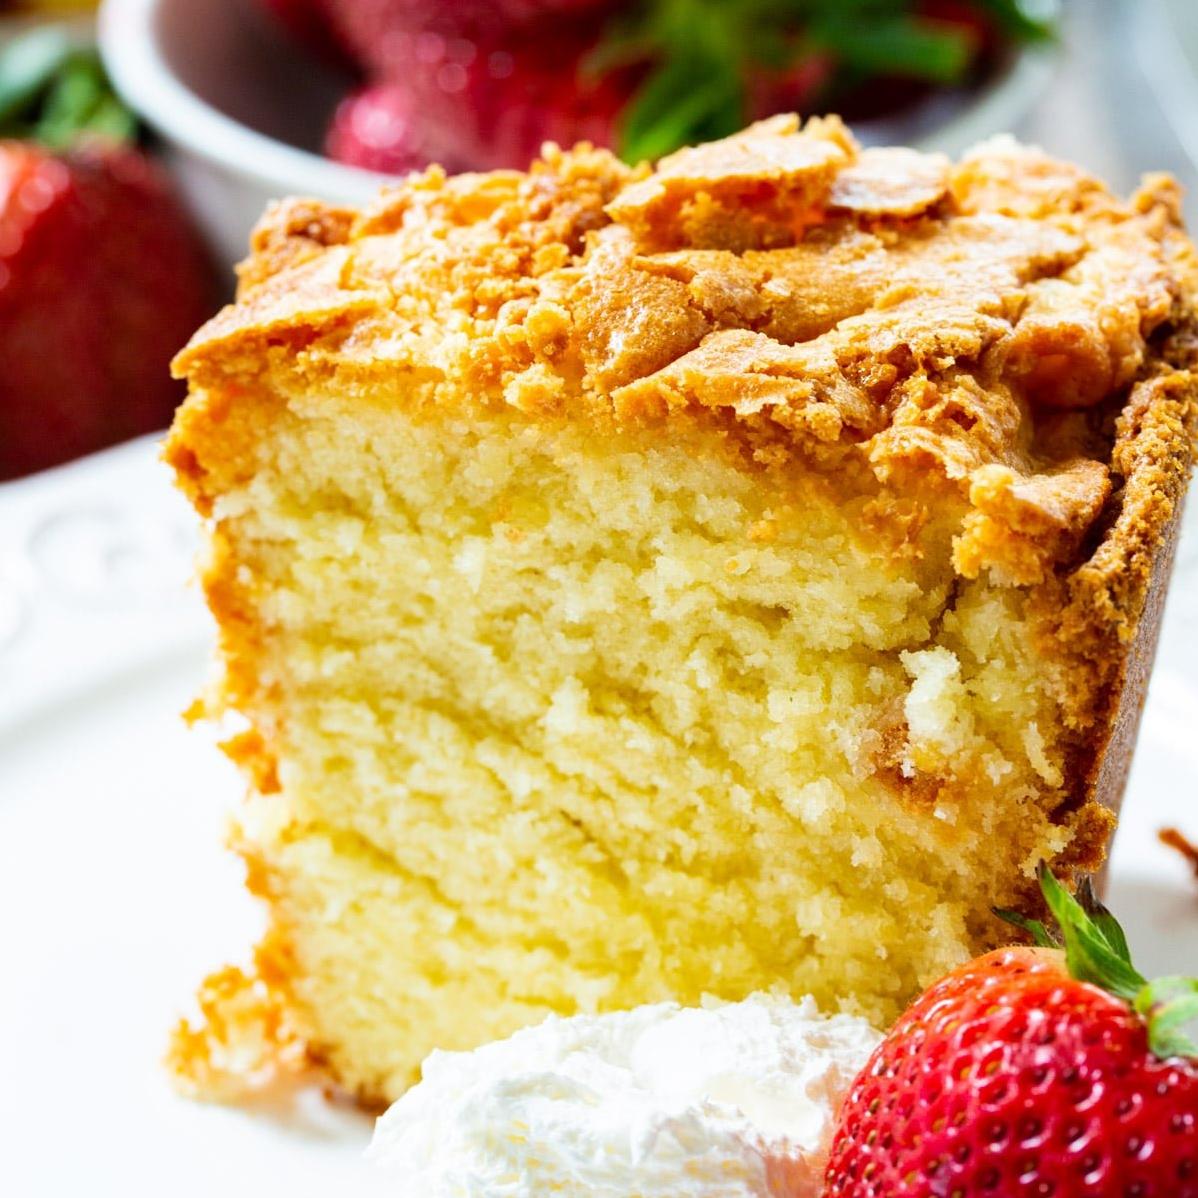  A slice of history in every bite - the classic pound cake recipe perfected!